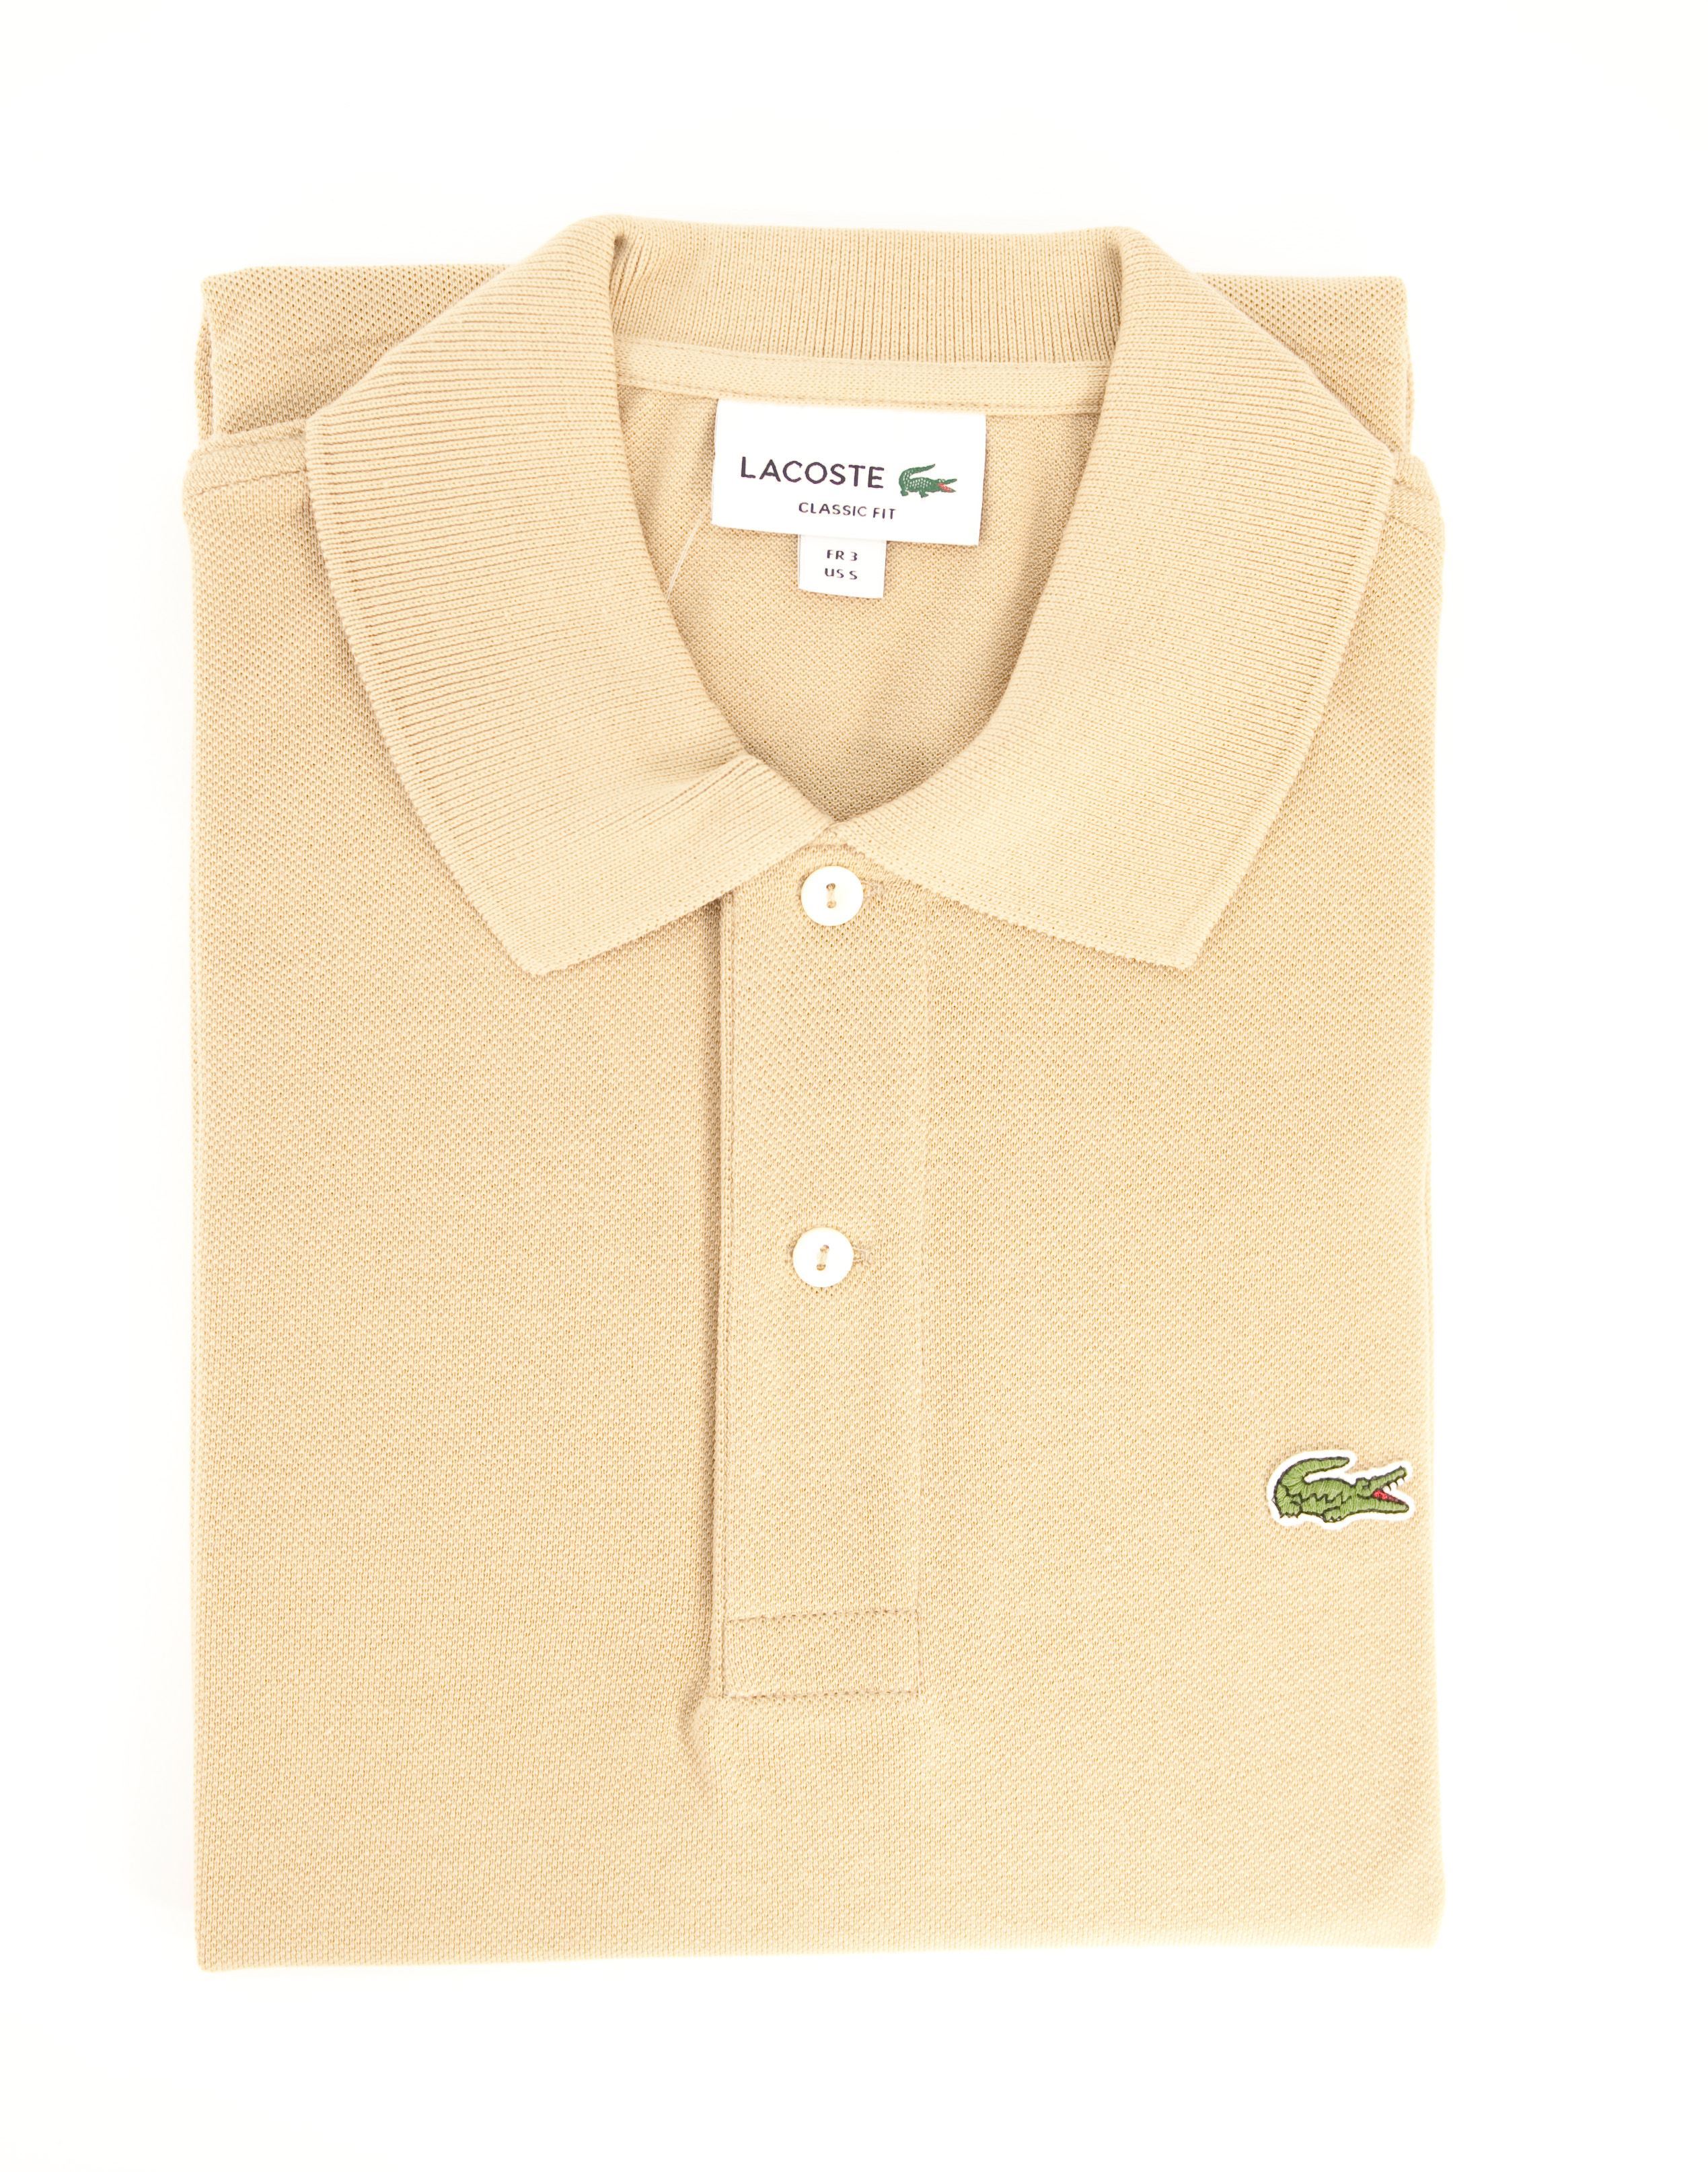 Lacoste lacoste polo Classic Fit 